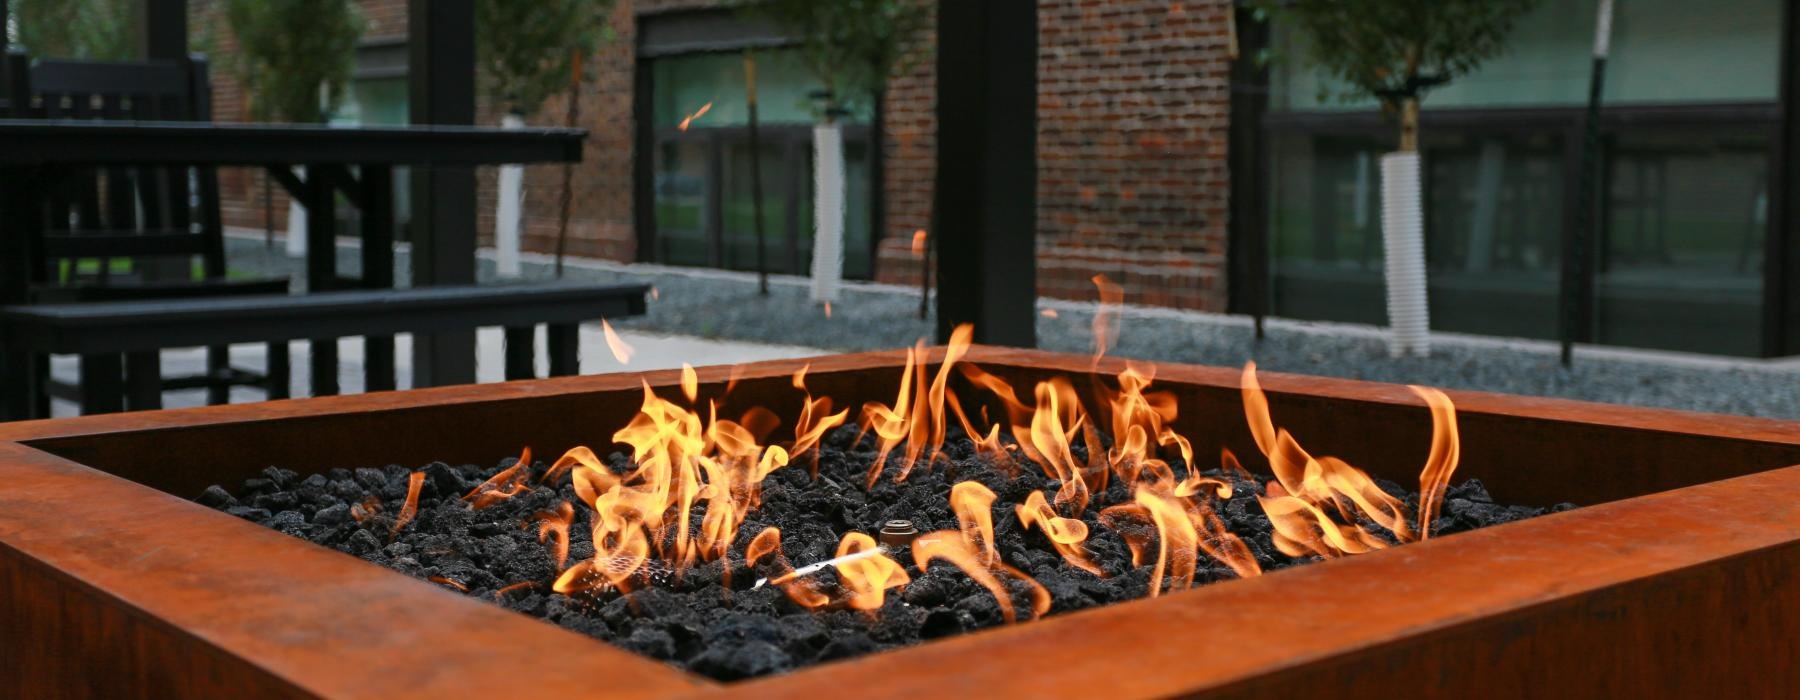 a large fire pit and trees